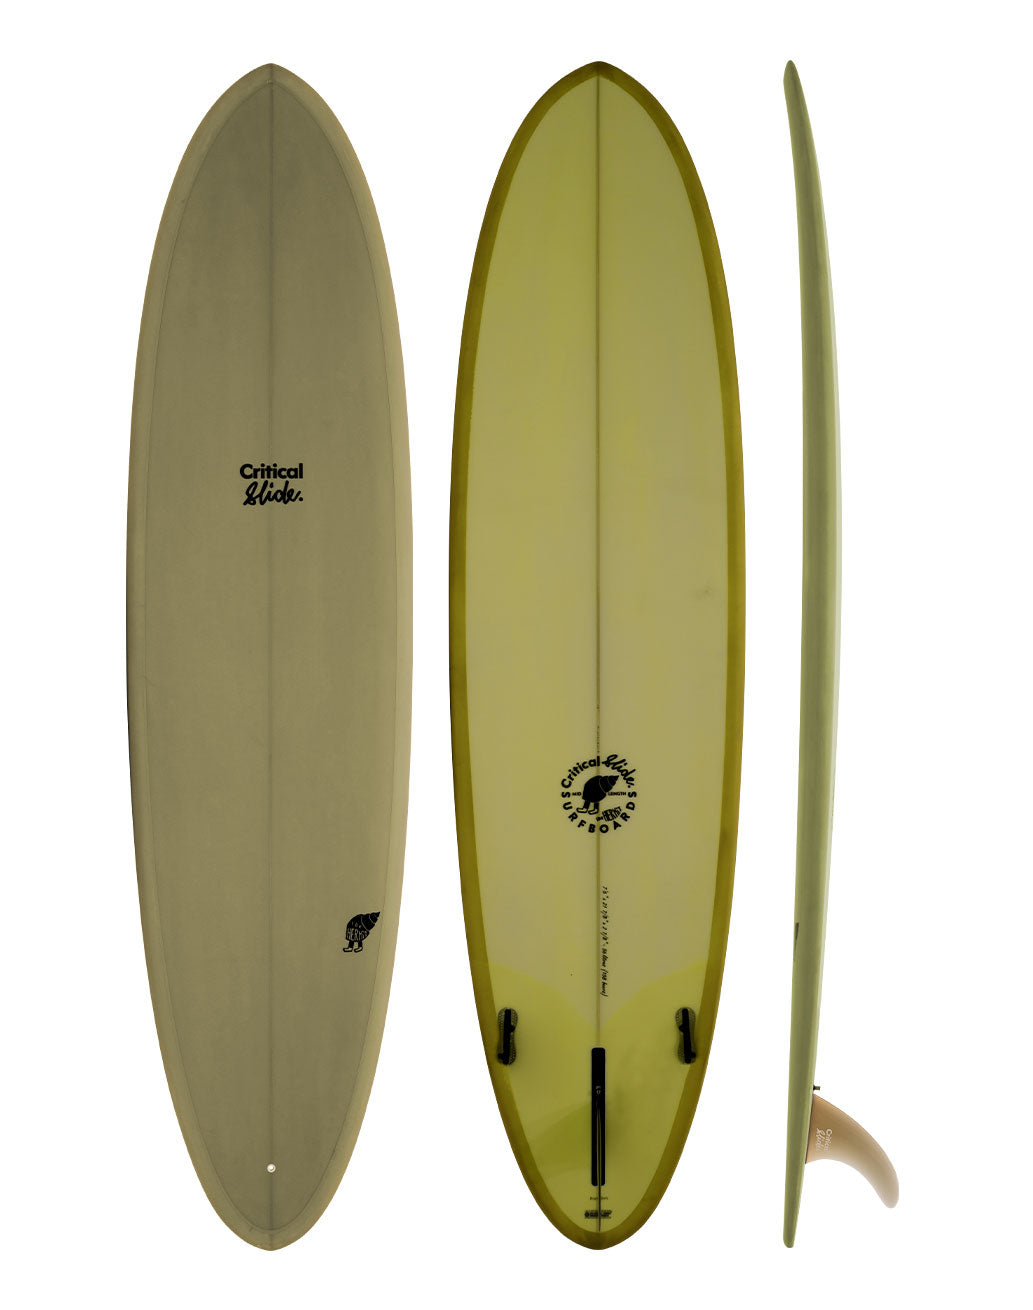 The Critical Slide Society Surfboards - The Hermit - jade green coloured mid length surfboard